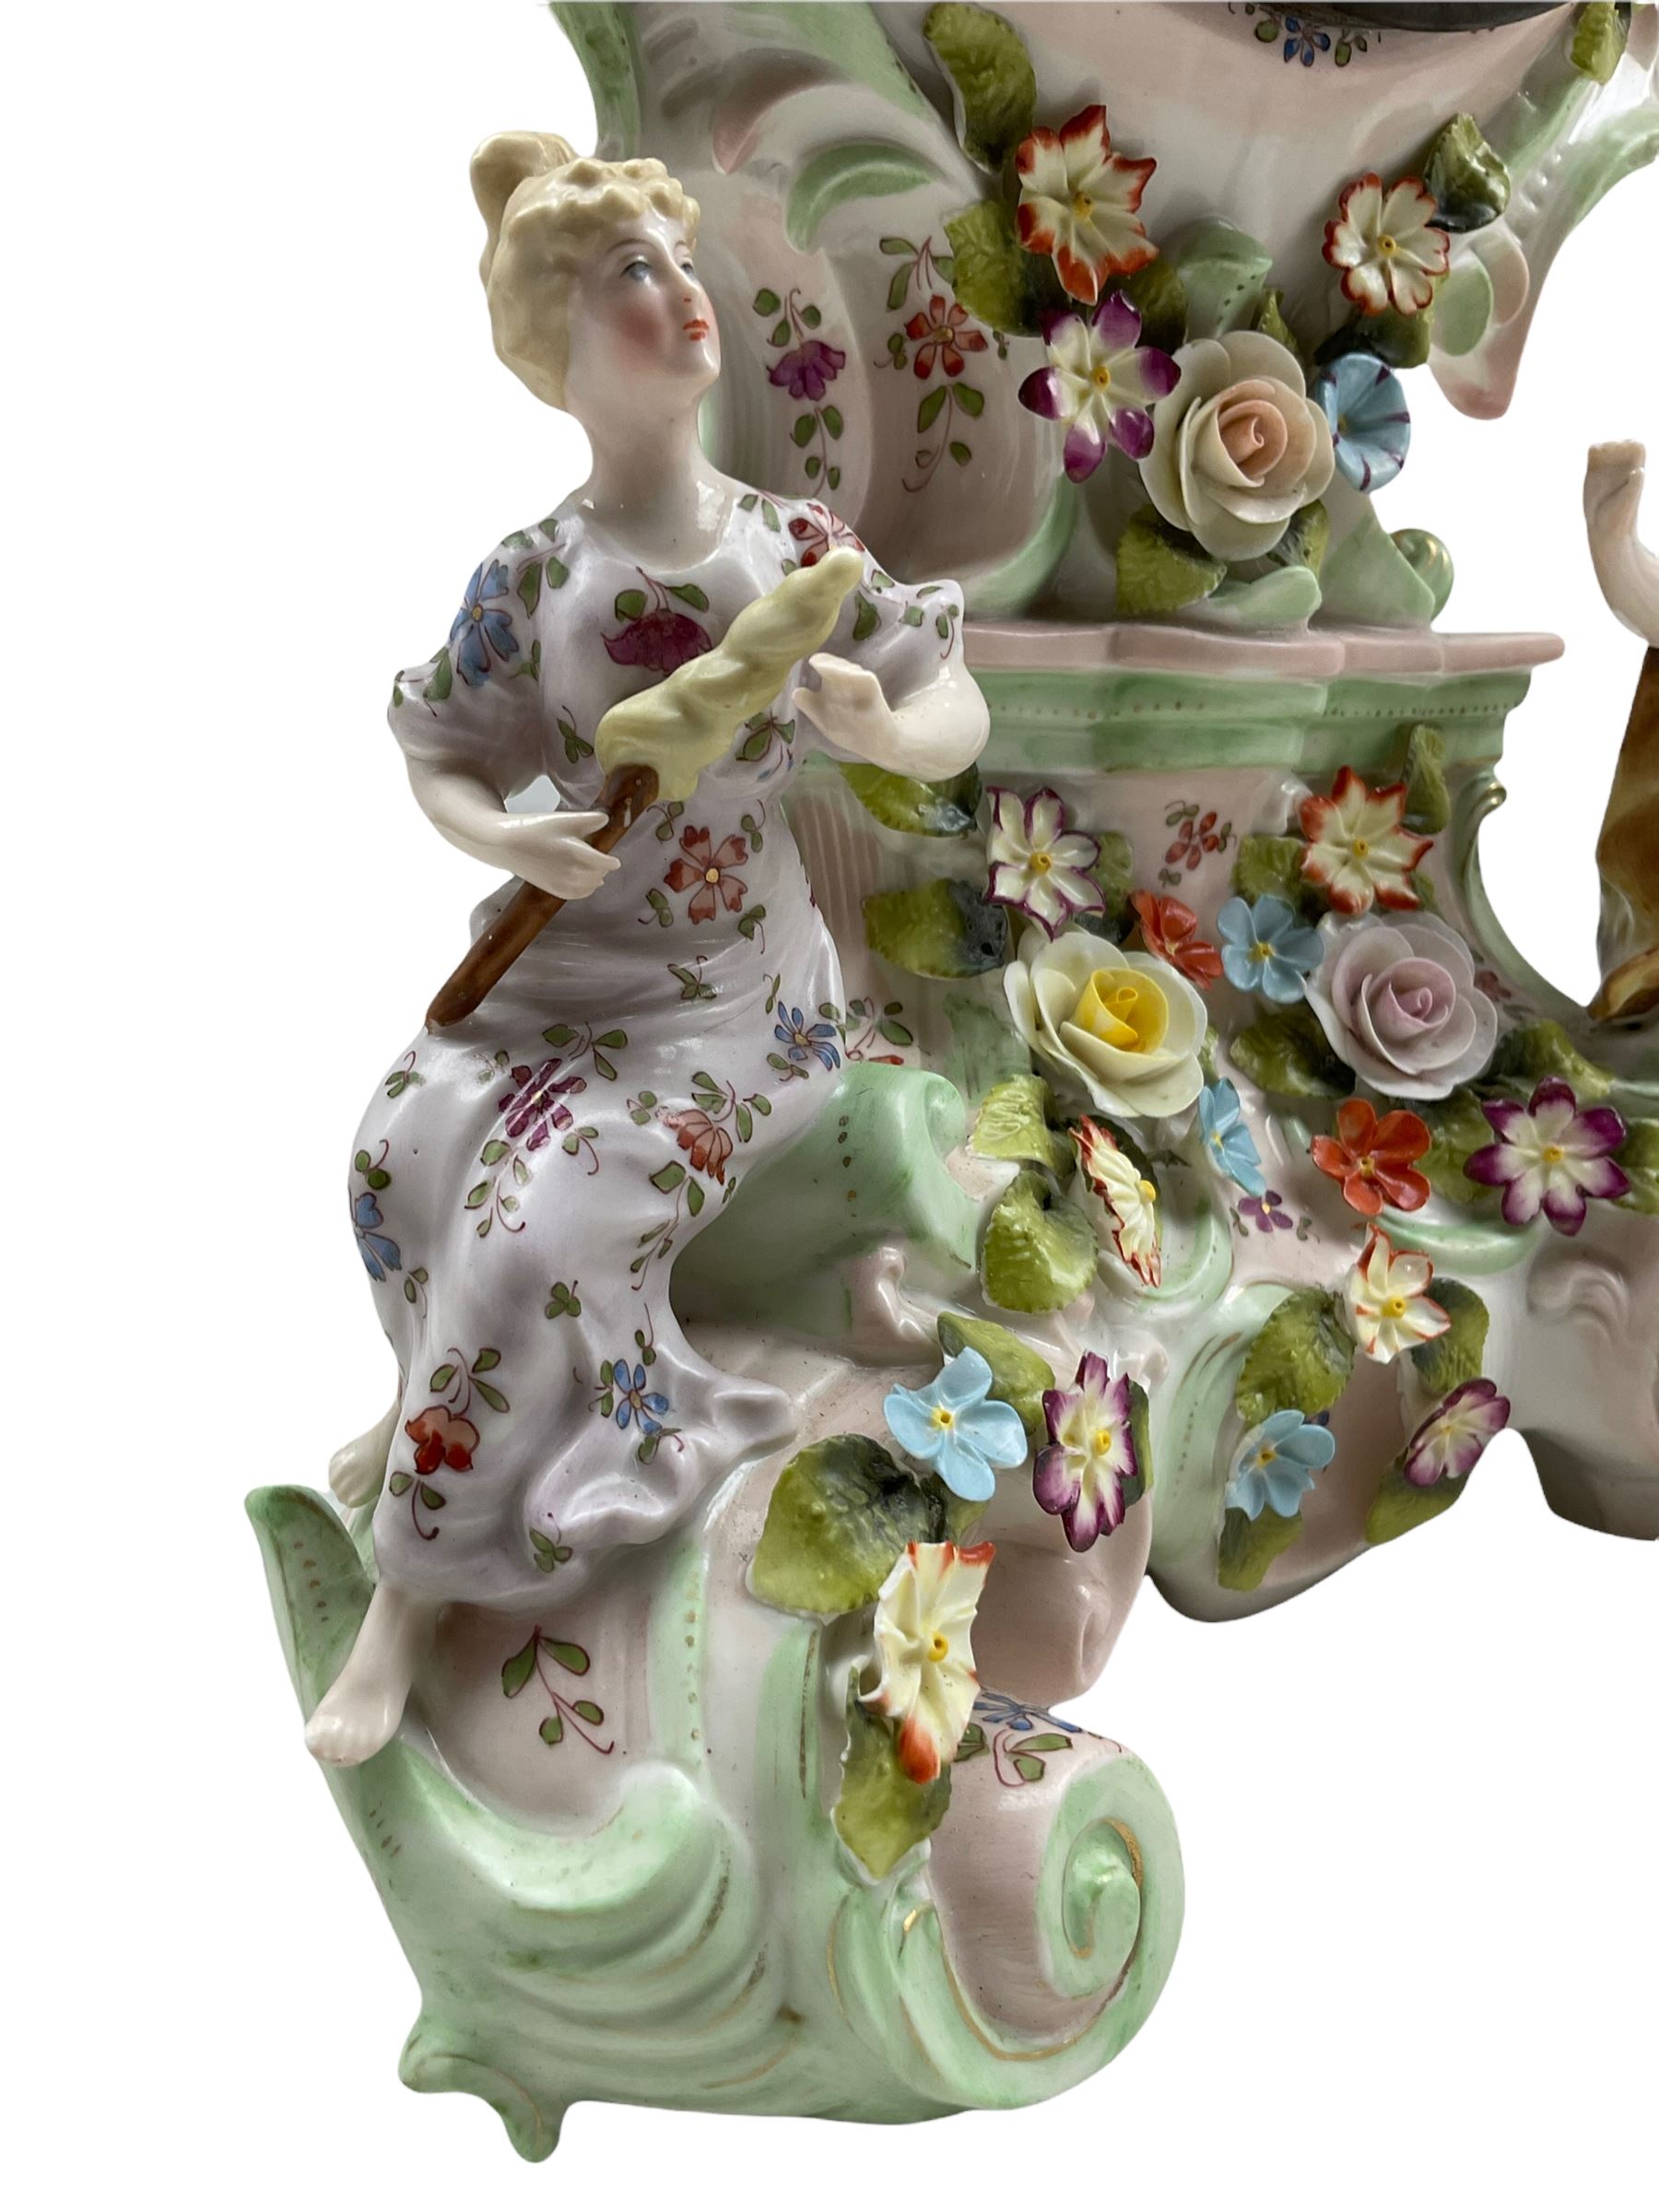 Mid-19th century continental porcelain mantle clock in the Meissen Rococo style decorated with encru - Image 2 of 3